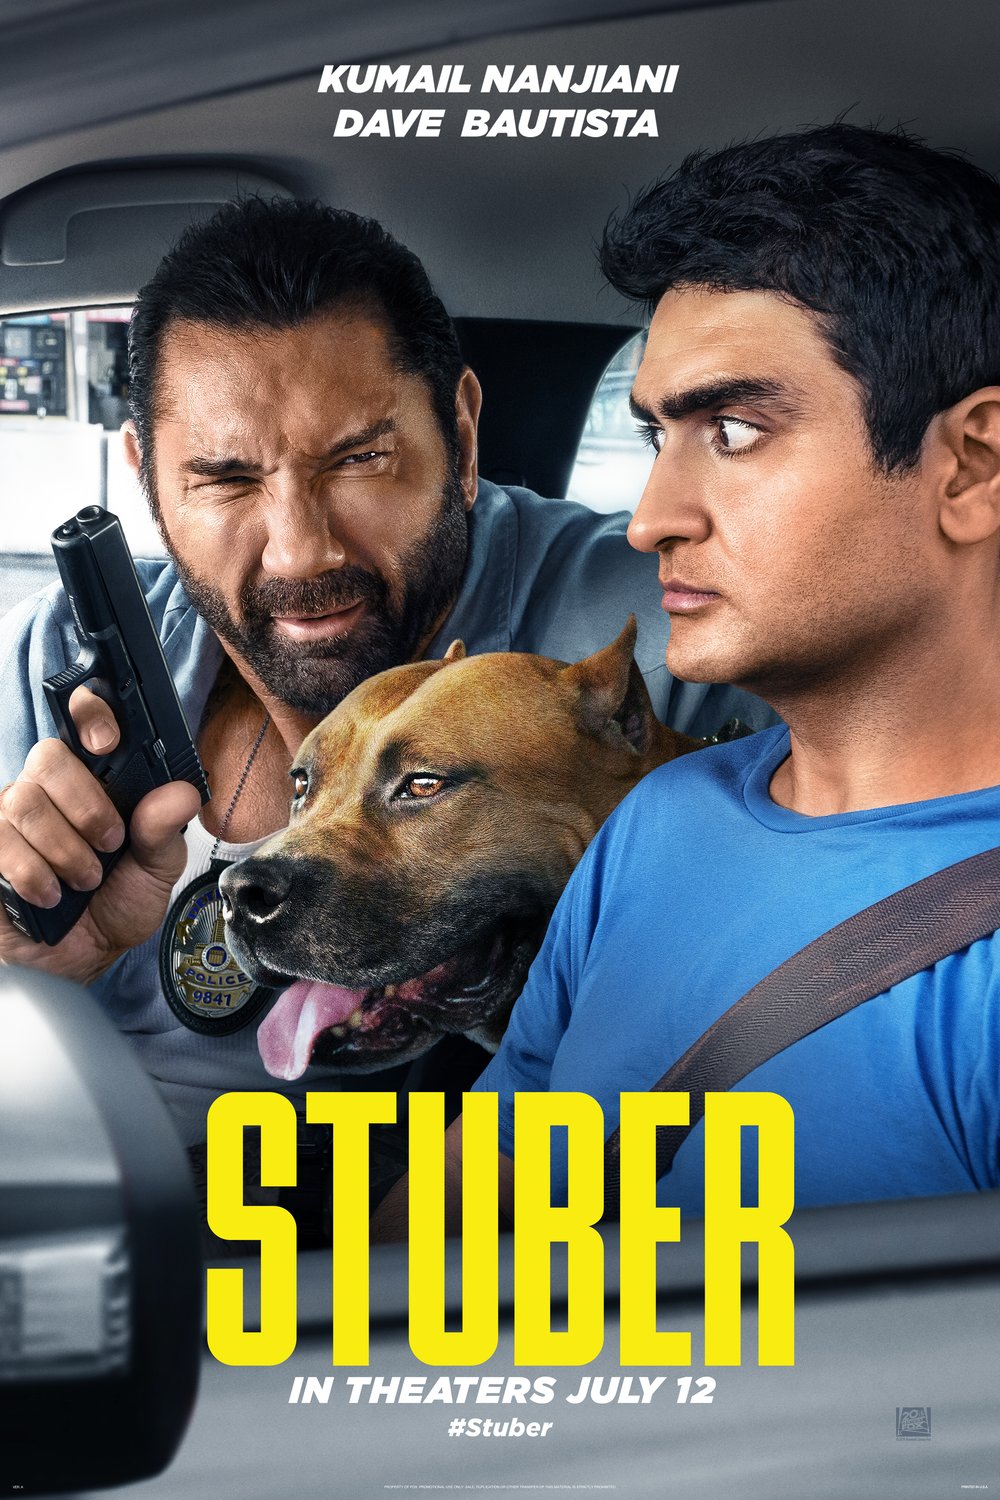 Poster of the movie Stuber